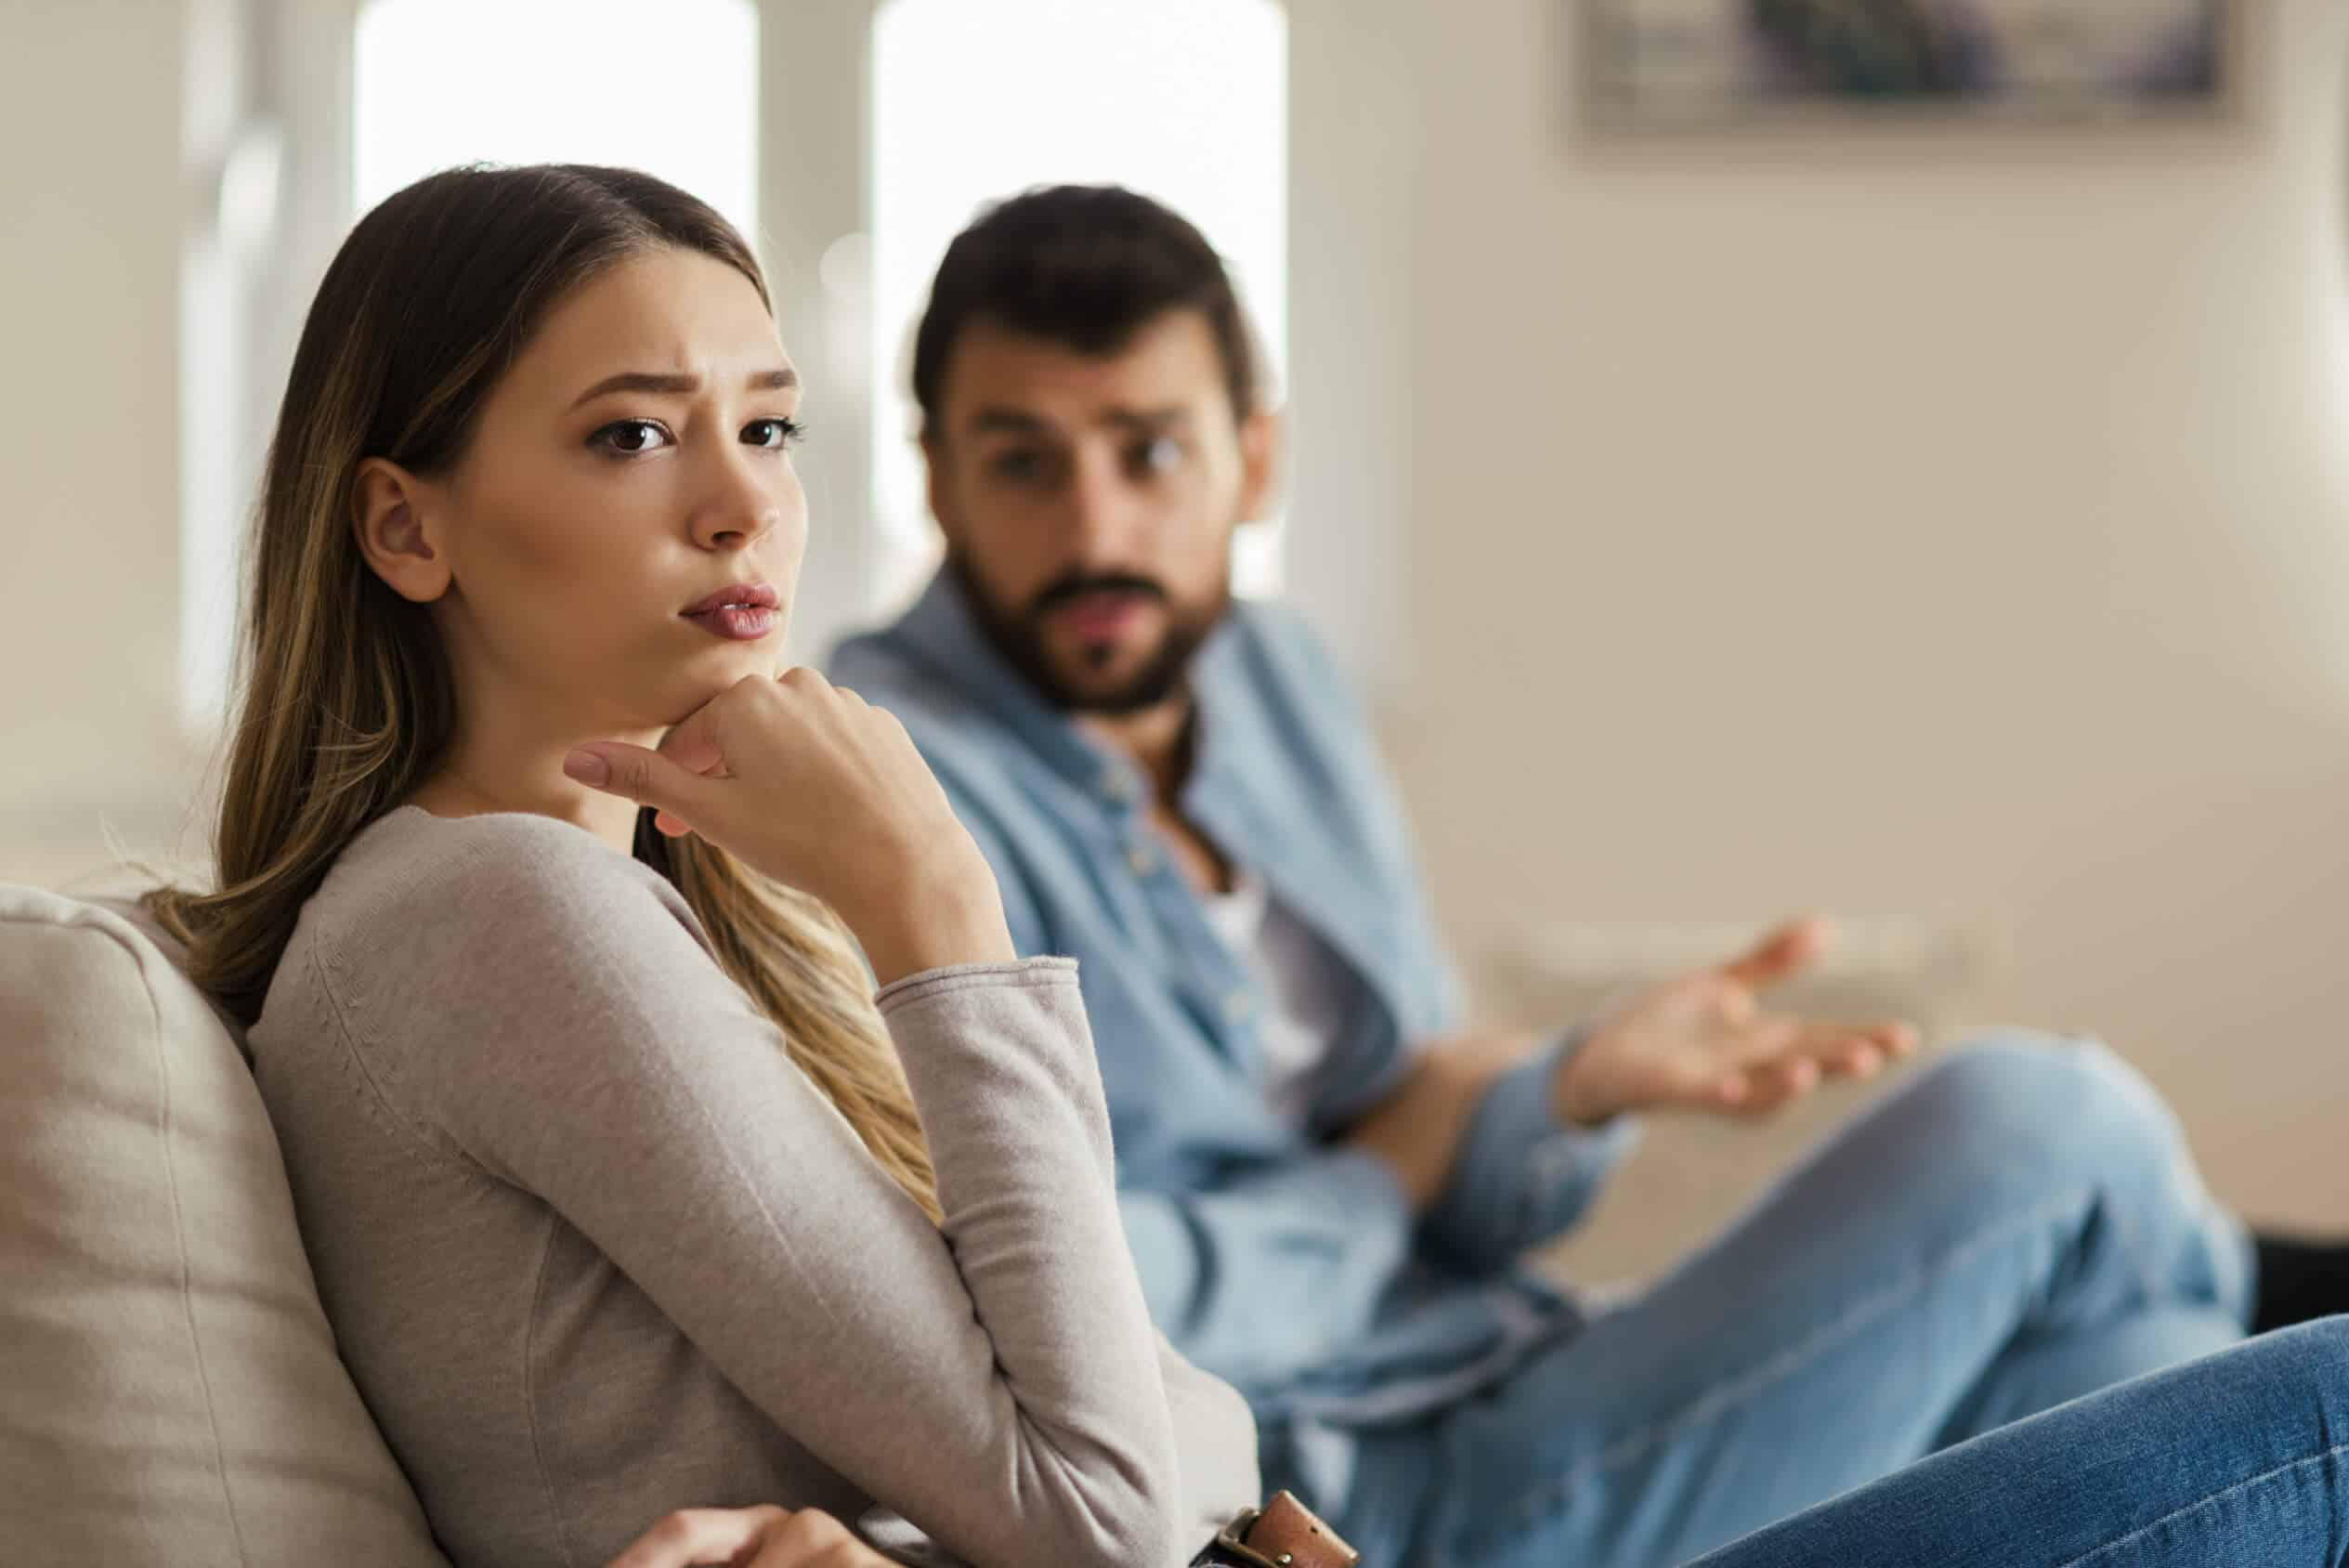 a woman looks worried as a man talks to her